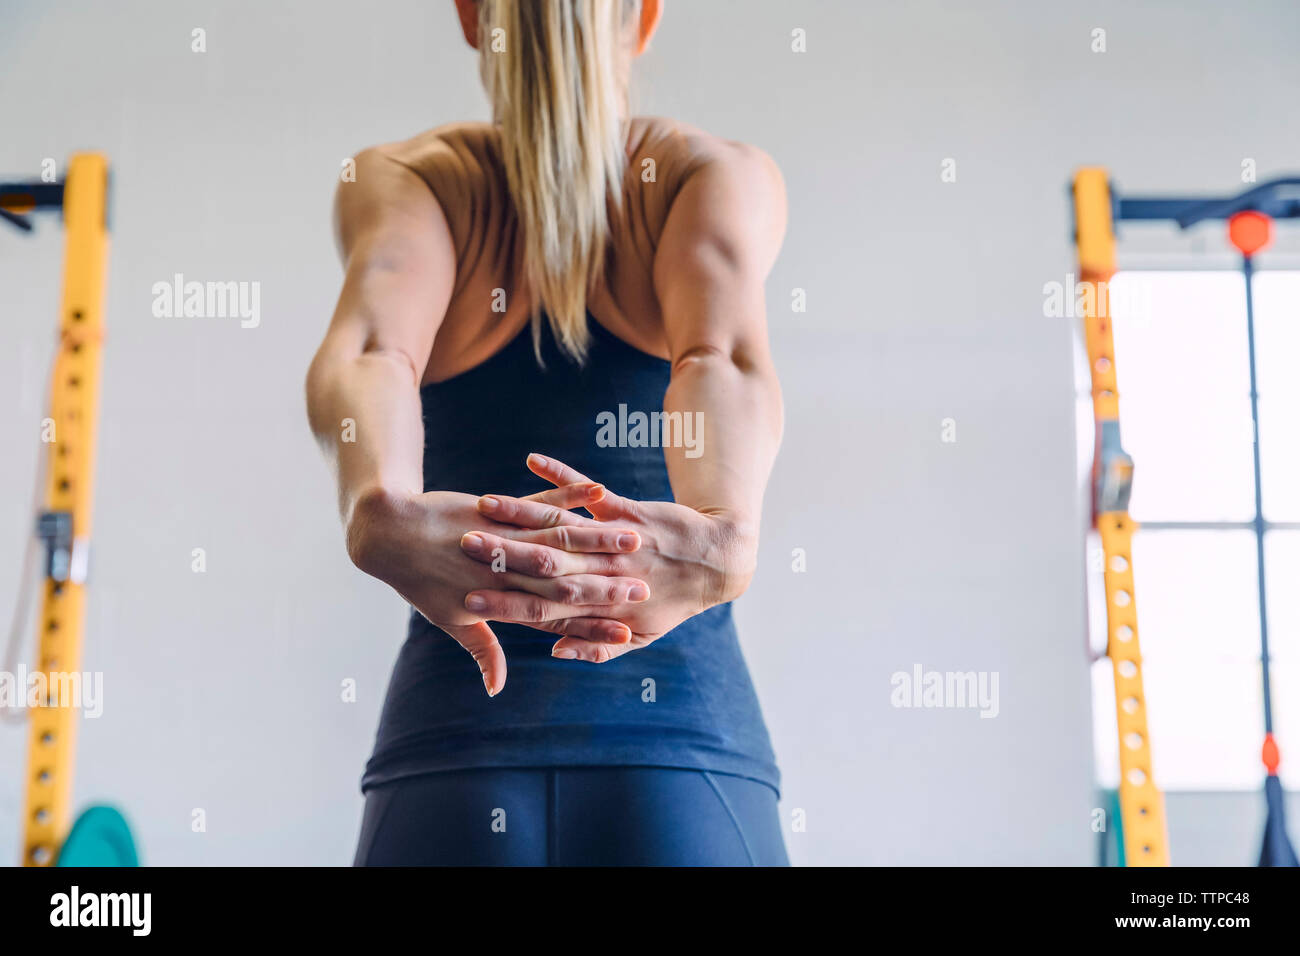 Rear view of woman stretching hands behind back while exercising in gym Stock Photo